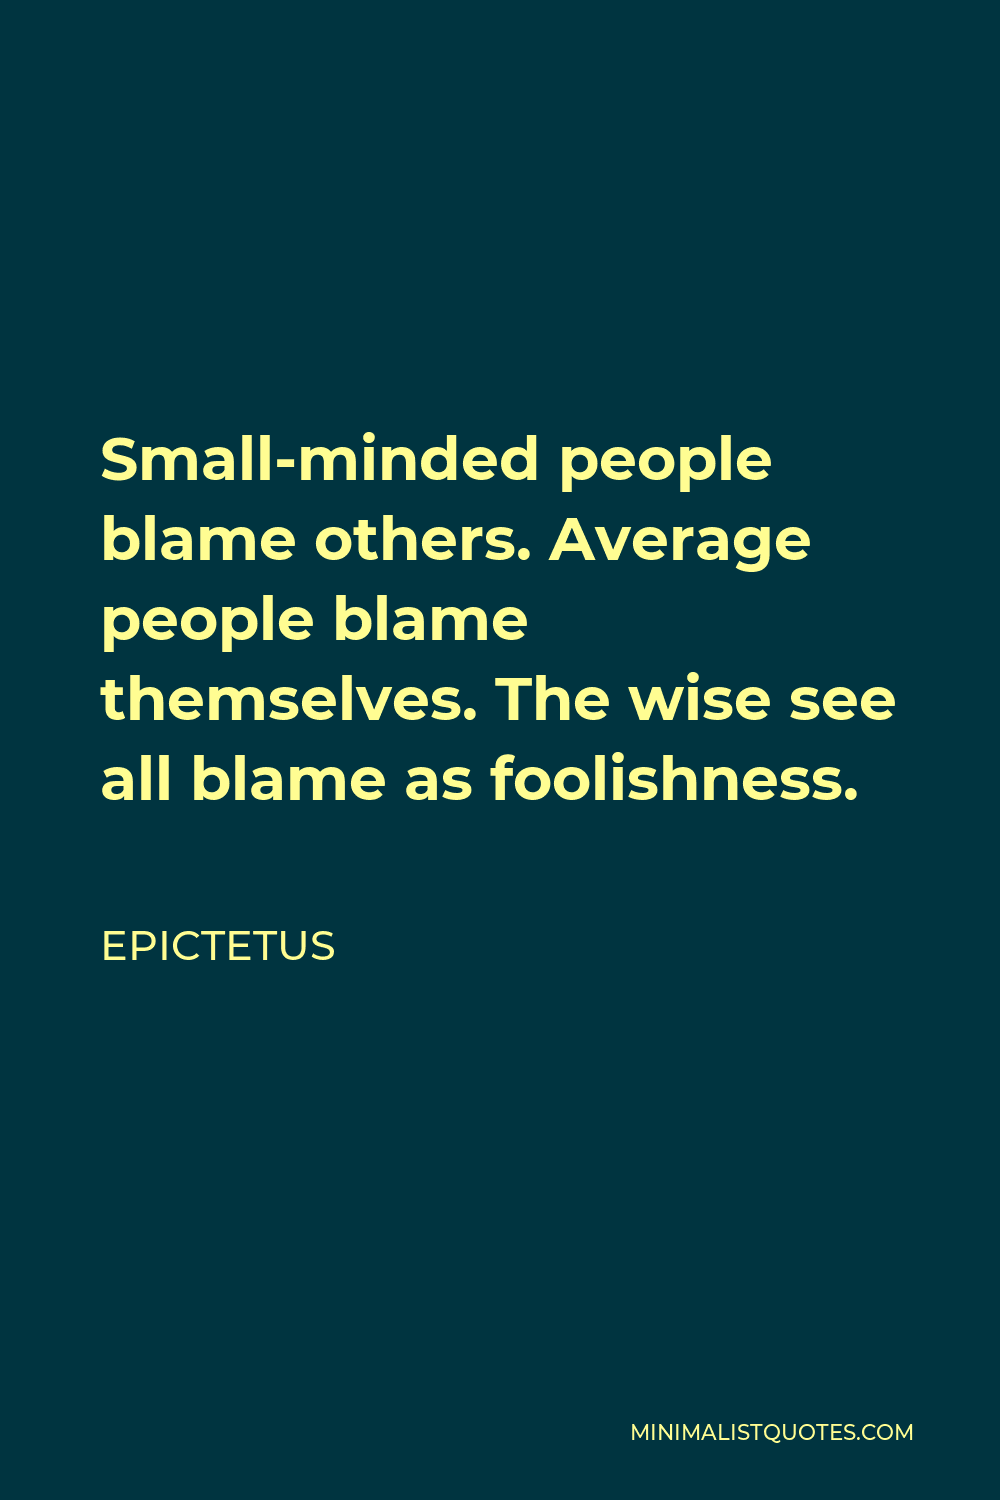 Epictetus Quote - Small-minded people blame others. Average people blame themselves. The wise see all blame as foolishness.